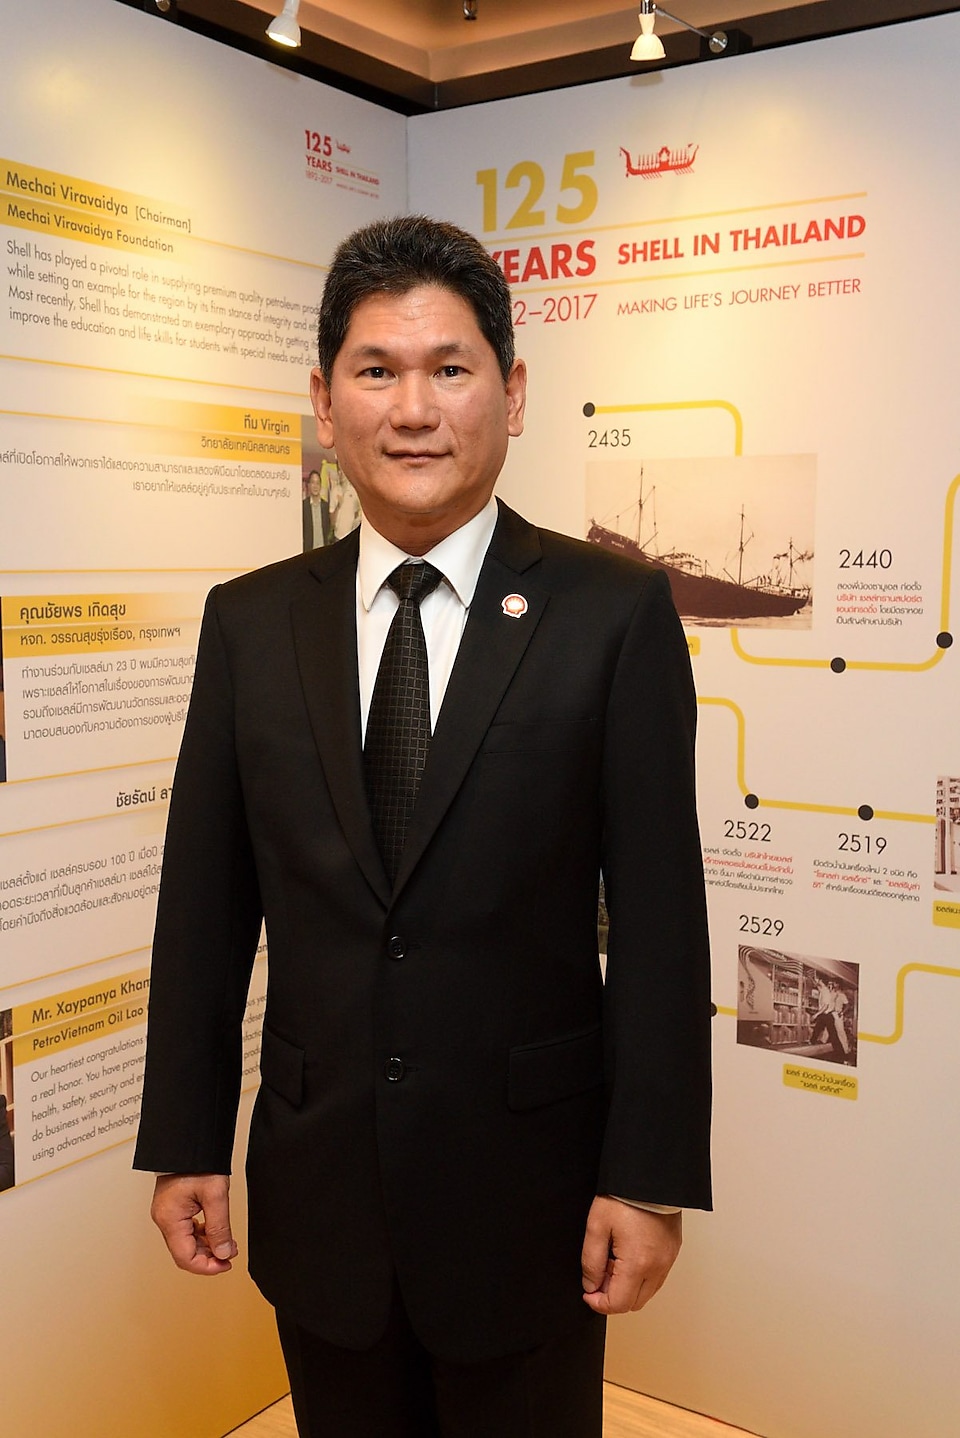 Shell Thailand celebrates its 125th anniversary and marks Shell’s purpose of “Making Life’s Journey Better” with a tribute to His Late Majesty King Bhumibol